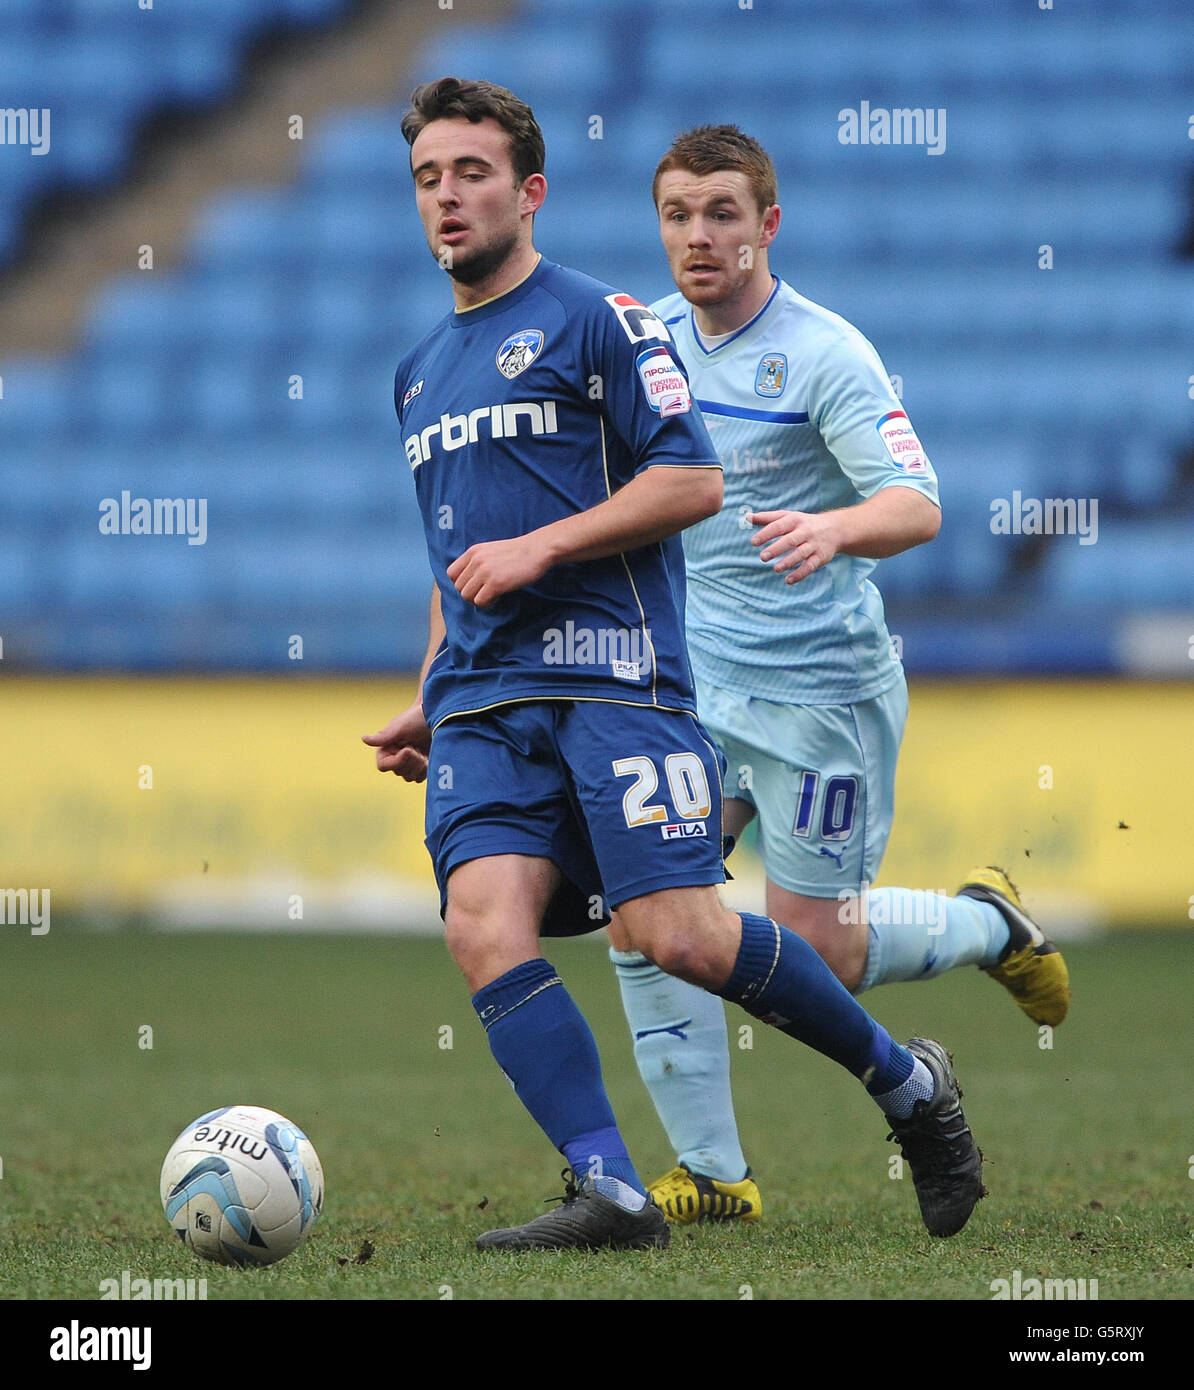 Coventry City's John Fleck (right) and Oldham Athletic's Jose Baxter (left) during the npower League One match at the Ricoh Arena, Coventry. Stock Photo